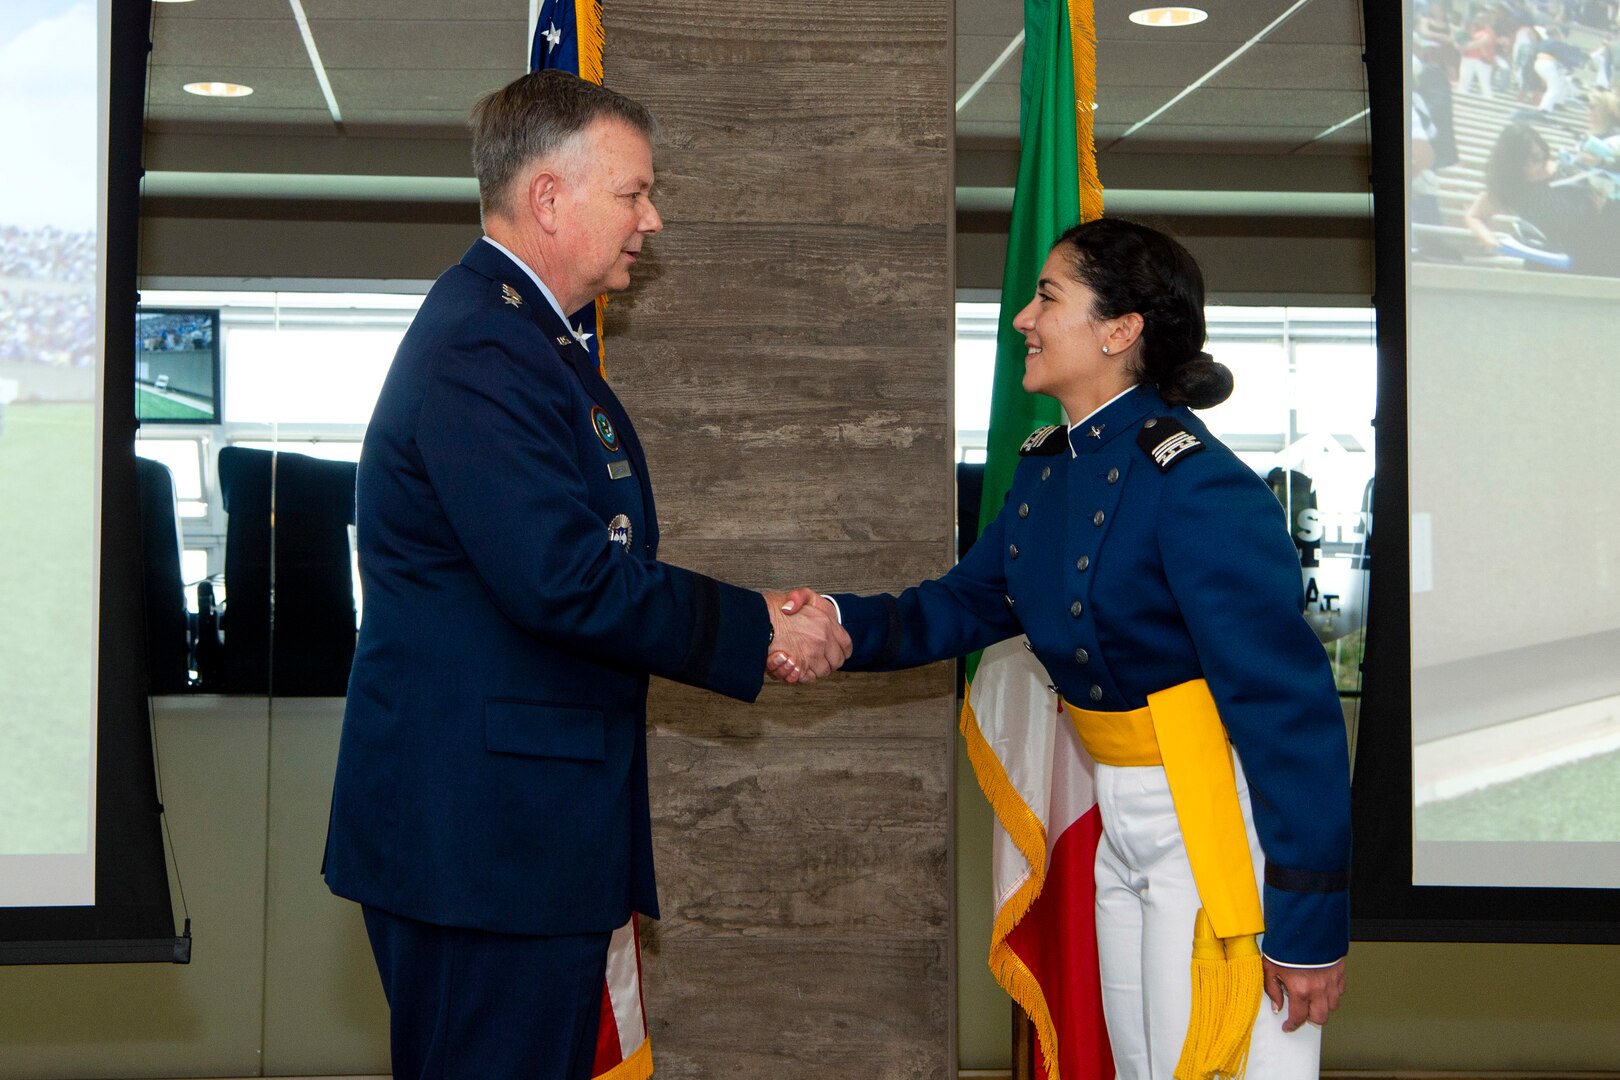 U.S. Air Force Gen. Glen D. VanHerck, commander of North American Aerospace Defense Command and U.S. Northern Command, congratulates Mexican Navy Cadet Itzel Sinai Chan Topete on her graduation from the U.S. Air Force Academy.